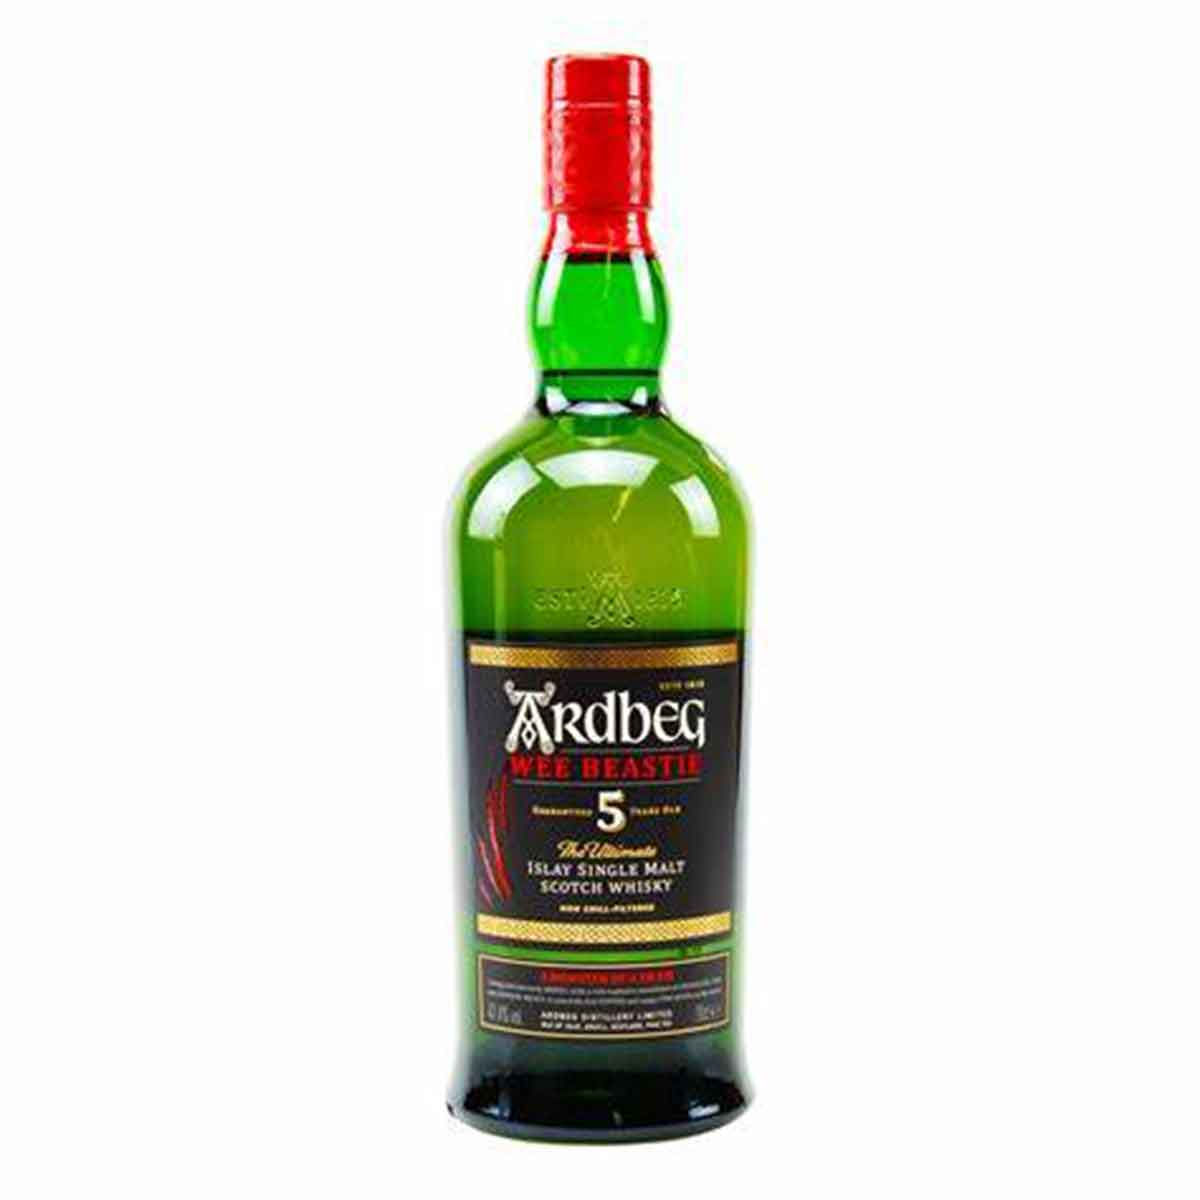 TAG Liquor Stores BC-Ardbeg Wee Beastie 5 Year Old Scotch Whisky 750ml